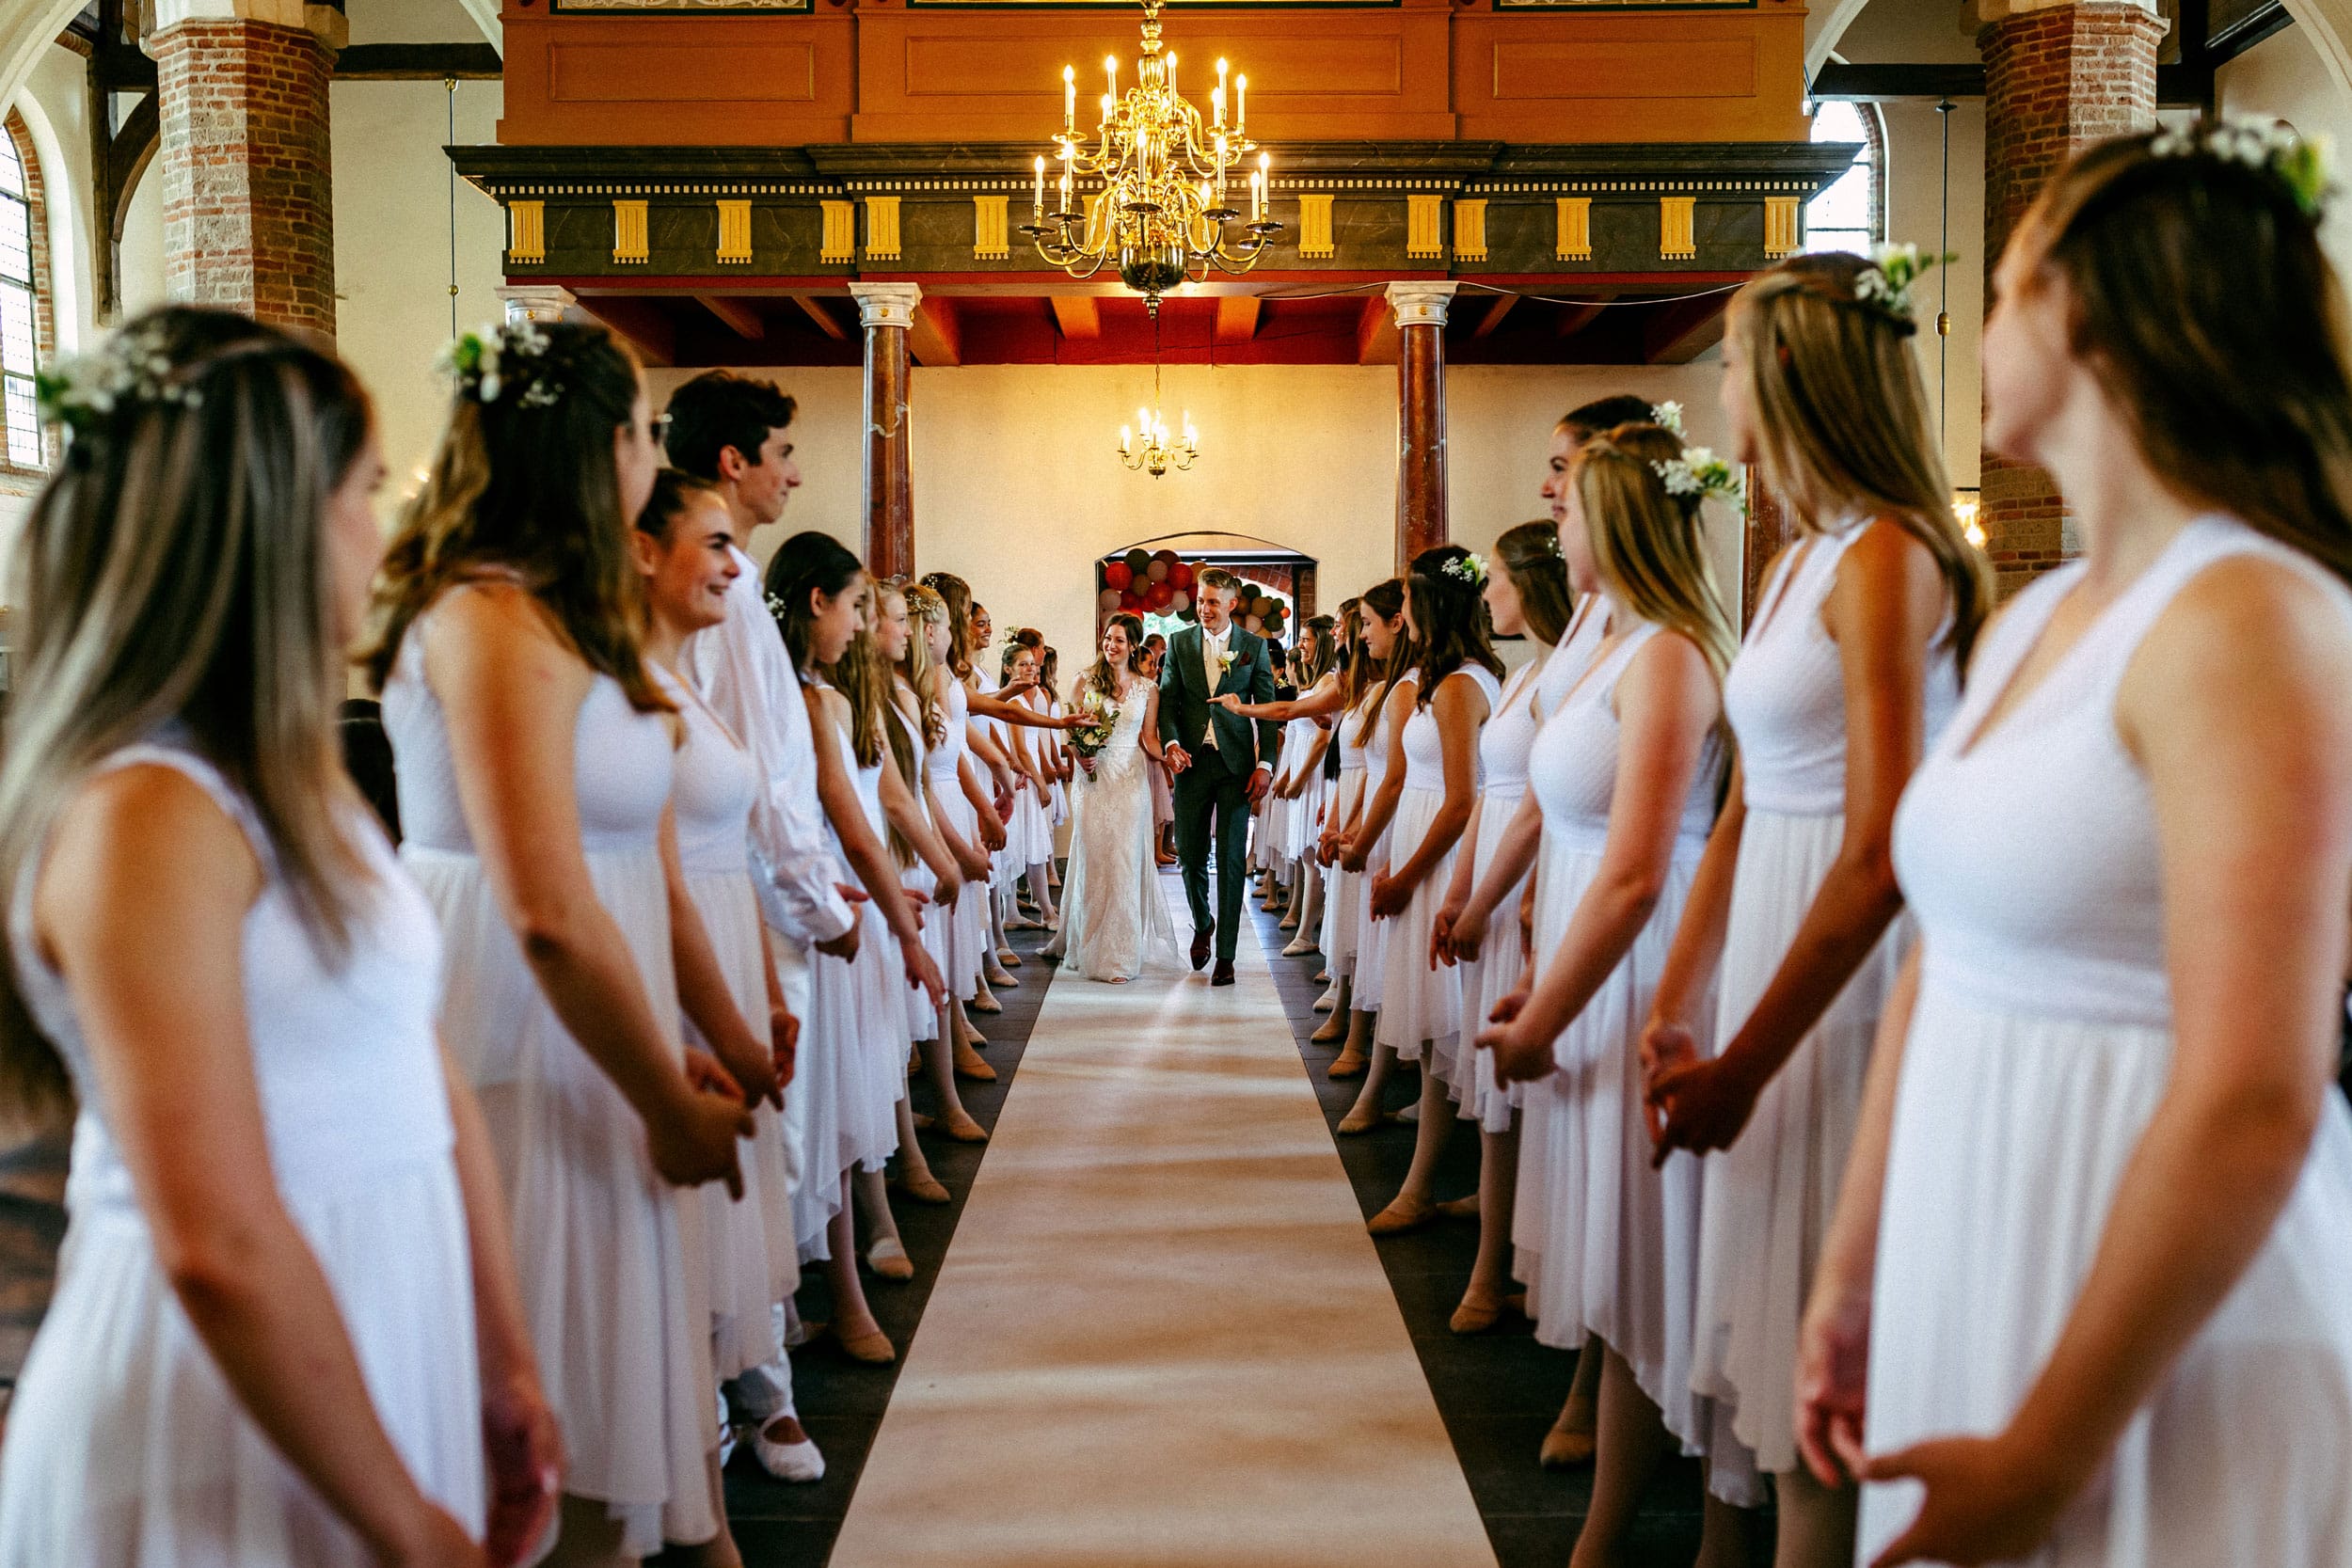 A wedding ceremony in a church with bridesmaids walking down the aisle.